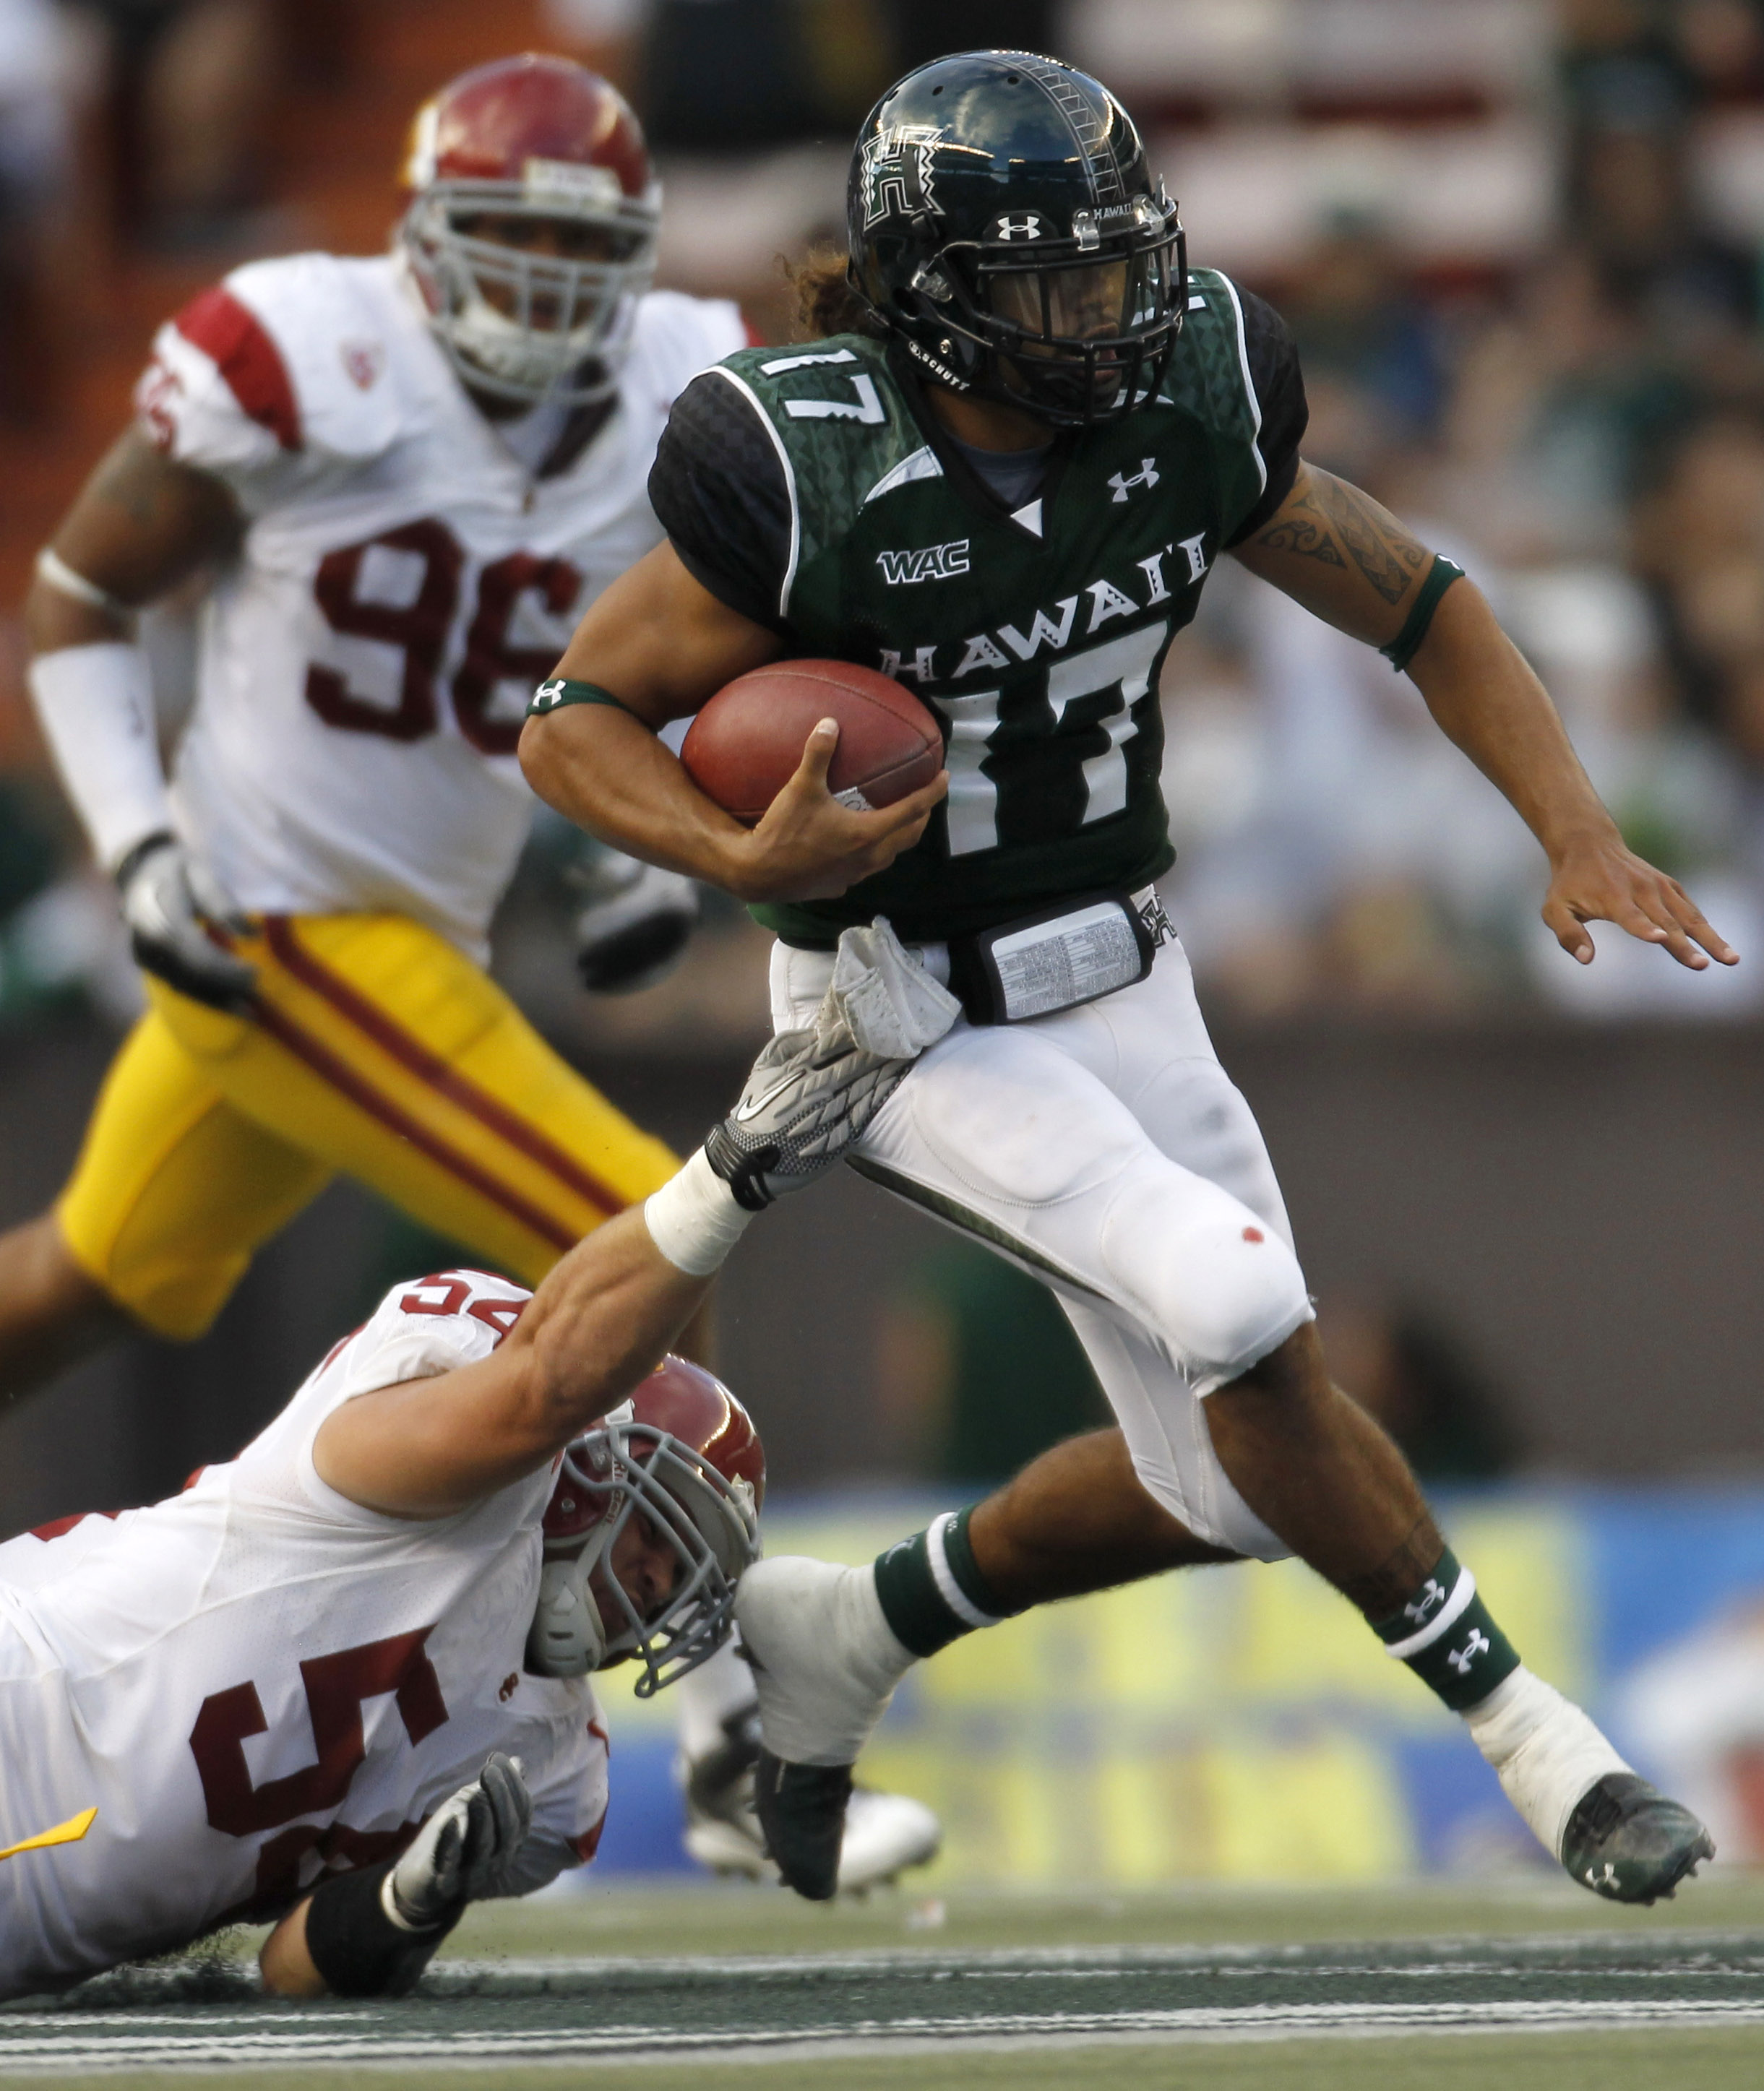 HONOLULU - SEPTEMBER 02: Bryant Moniz #17 of the University of Hawaii Warriors carries the ball during first half action against the University of Southern California Trojans at Aloha Stadium September 2, 2010 in Honolulu, Hawaii. (Photo by Kent Nishimura